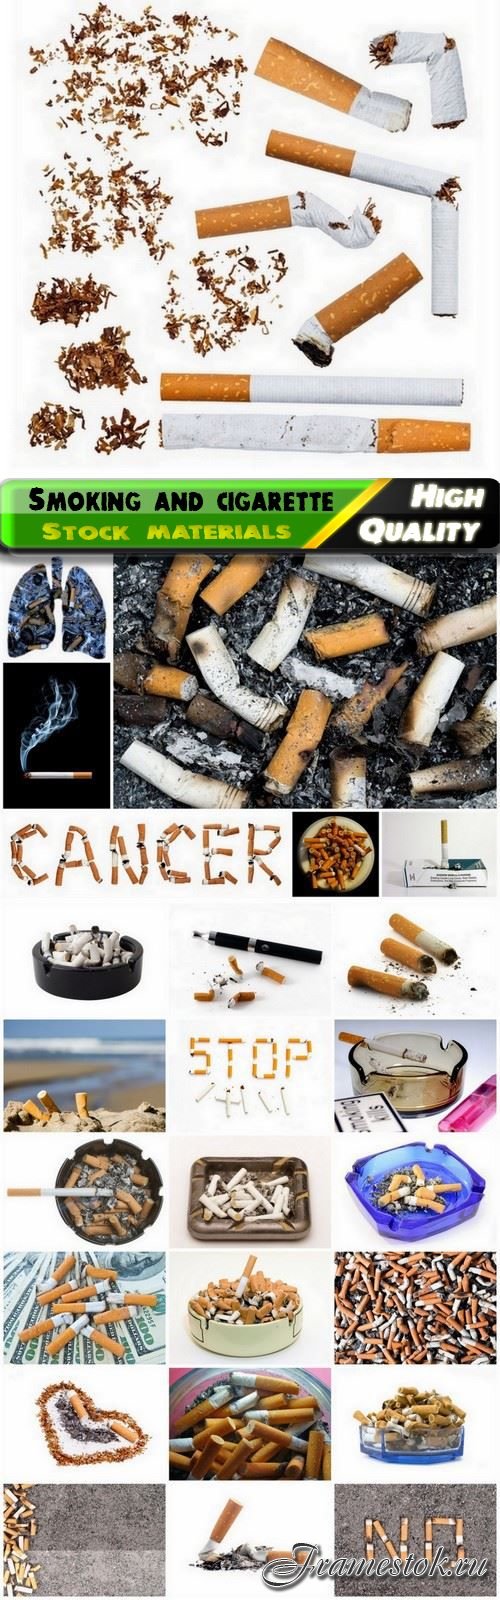 Smoking is bad habit and cigarette butts with ashes - 25 HQ Jpg